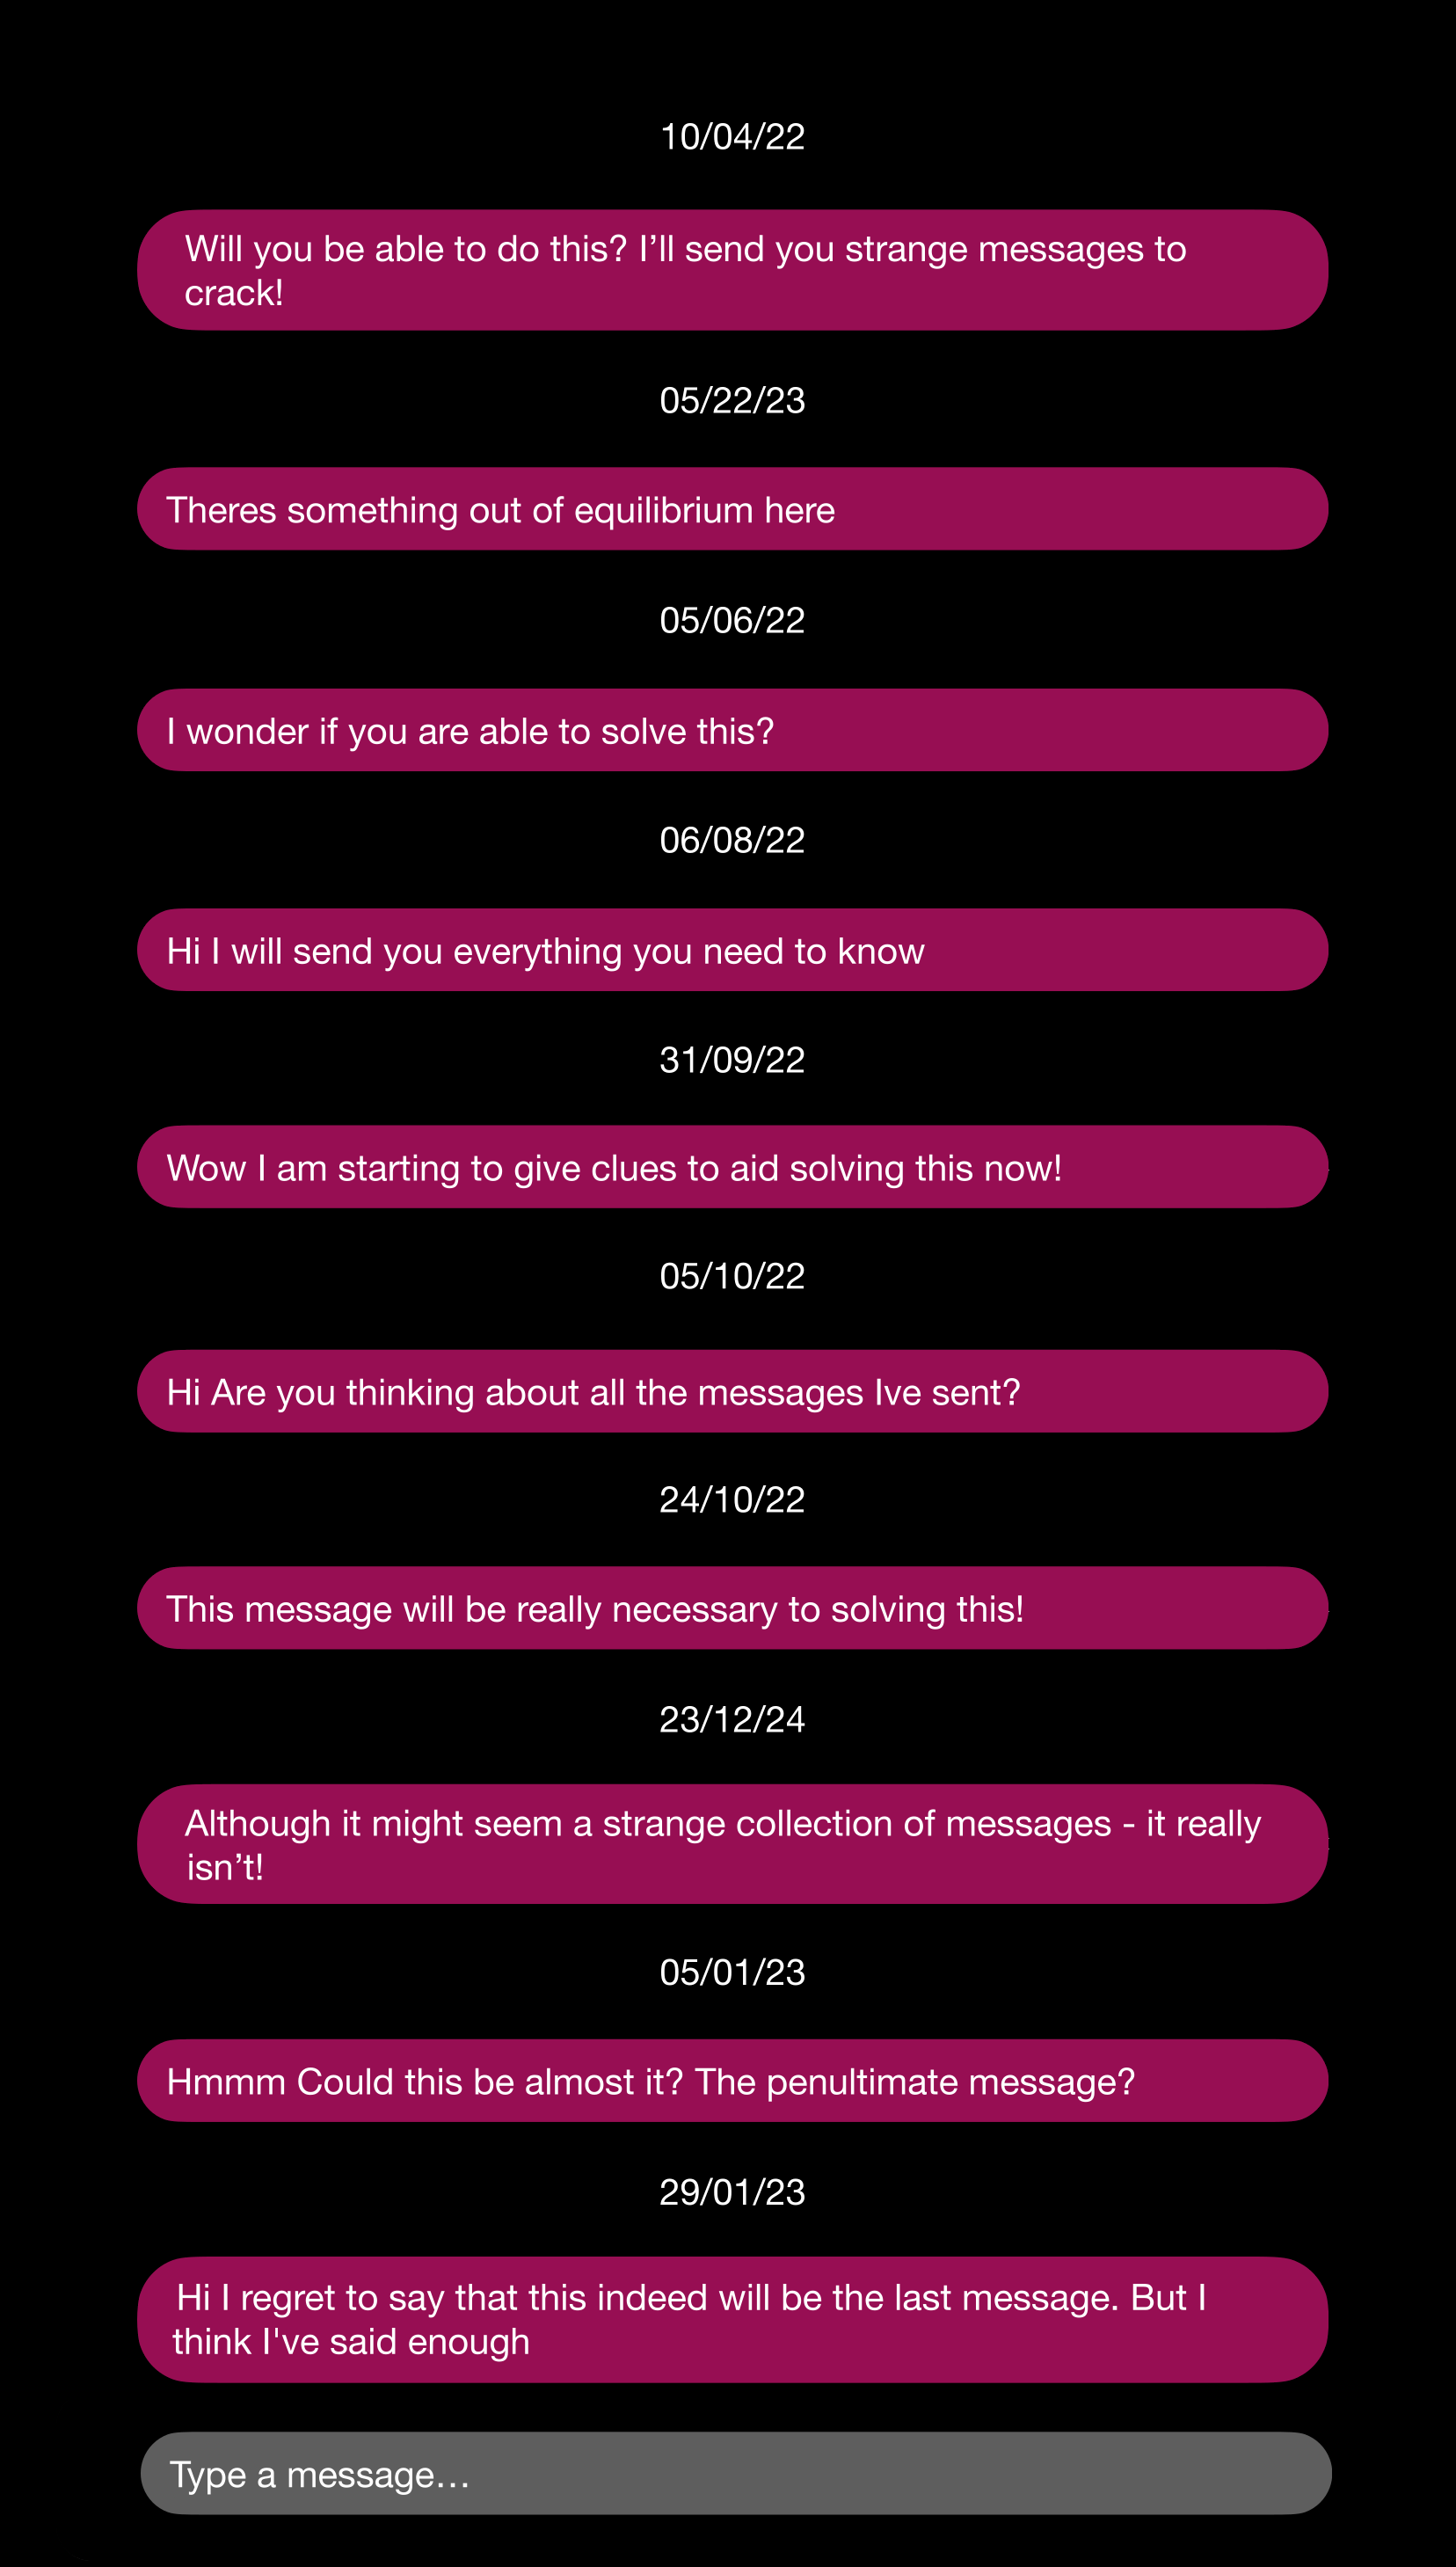 The image resembles the display of a mobile messaging app.  The image comprises a sequence of dates (in white text on a black background) and with a message (in white text on a purple background) below each date.  The dates and messages are as follows: 10/04/22 Will you be able to do this? I'll send you strange messages to crack! 05/22/23 Theres something out of equilibrium here 05/06/22 I wonder if you are able to solve this? 06/08/22 Hi I will send you everything you need to know 31/09/22 Wow I am starting to give clues to aid solving this now! 05/10/22 Hi Are you thinking about all the messages Ive sent? 24/10/22 This message will be really necessary to solving this! 23/12/24 Although it might seem a strange collection of messages - it really isnâ€™t! 05/01/23 Hmmm Could this be almost it? The penultimate message? 29/01/23 Hi I regret to say that this indeed will be the last message. But I think I've said enough  At the bottom of the display is a grey box containing the text 'Type a message...'.